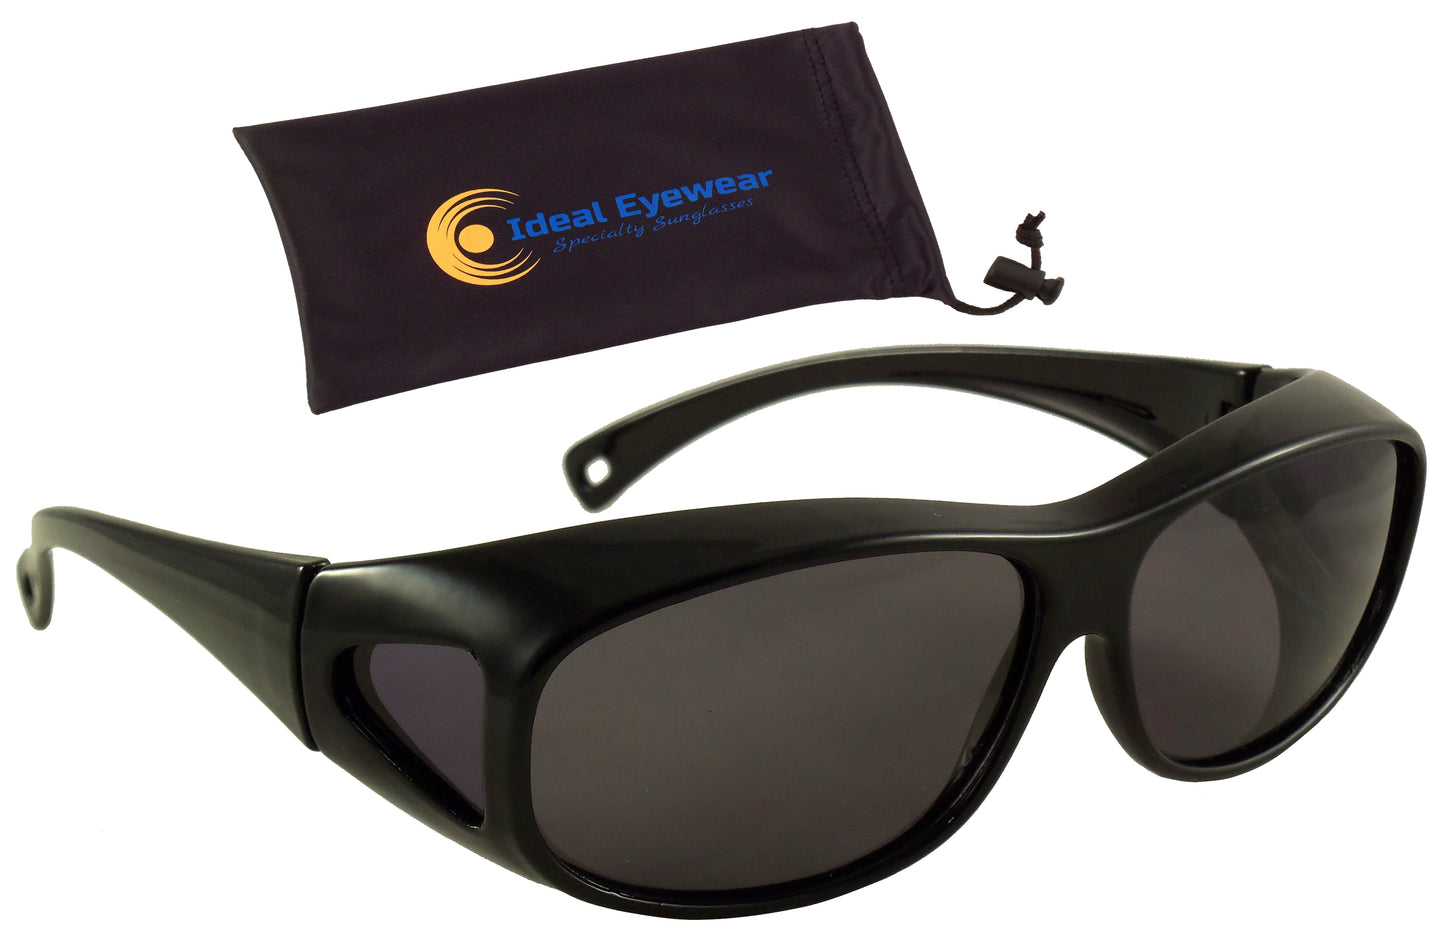 Floating Fit Over Sunglasses with Polarized Lenses - Wear Over Glasses